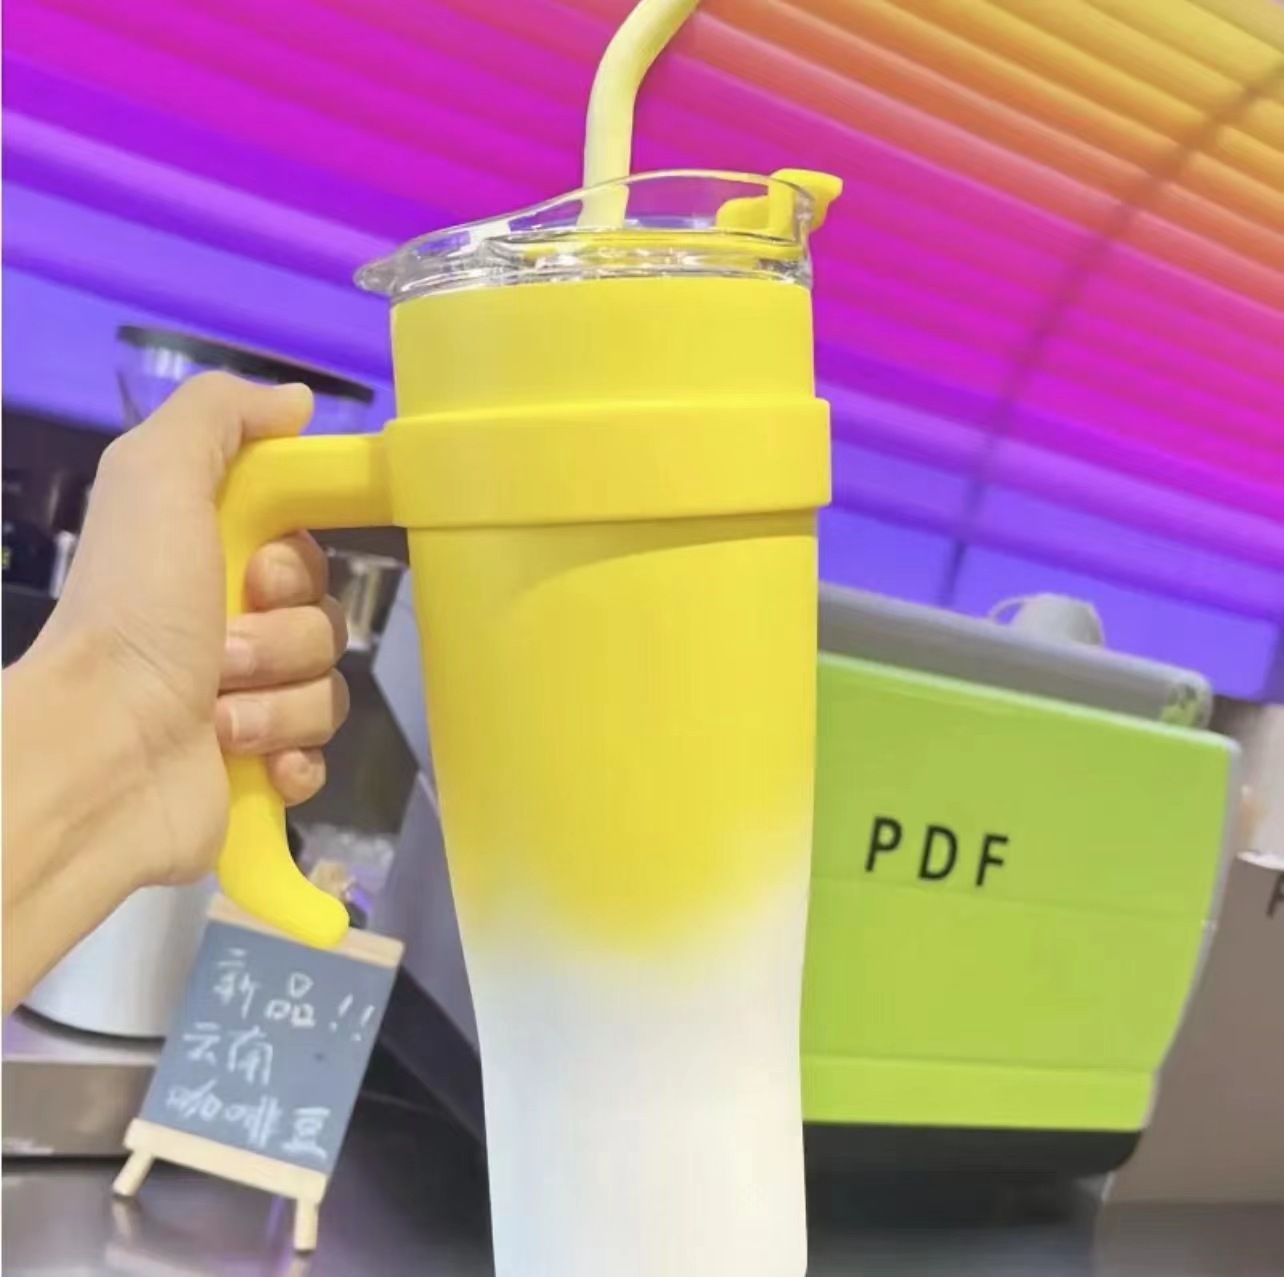 Big Mac Ice Cream Internet Celebrity Cup Vacuum Cup 40Oz Foreign Trade Cup Straw Large Capacity Good-looking Water Cup Wholesale